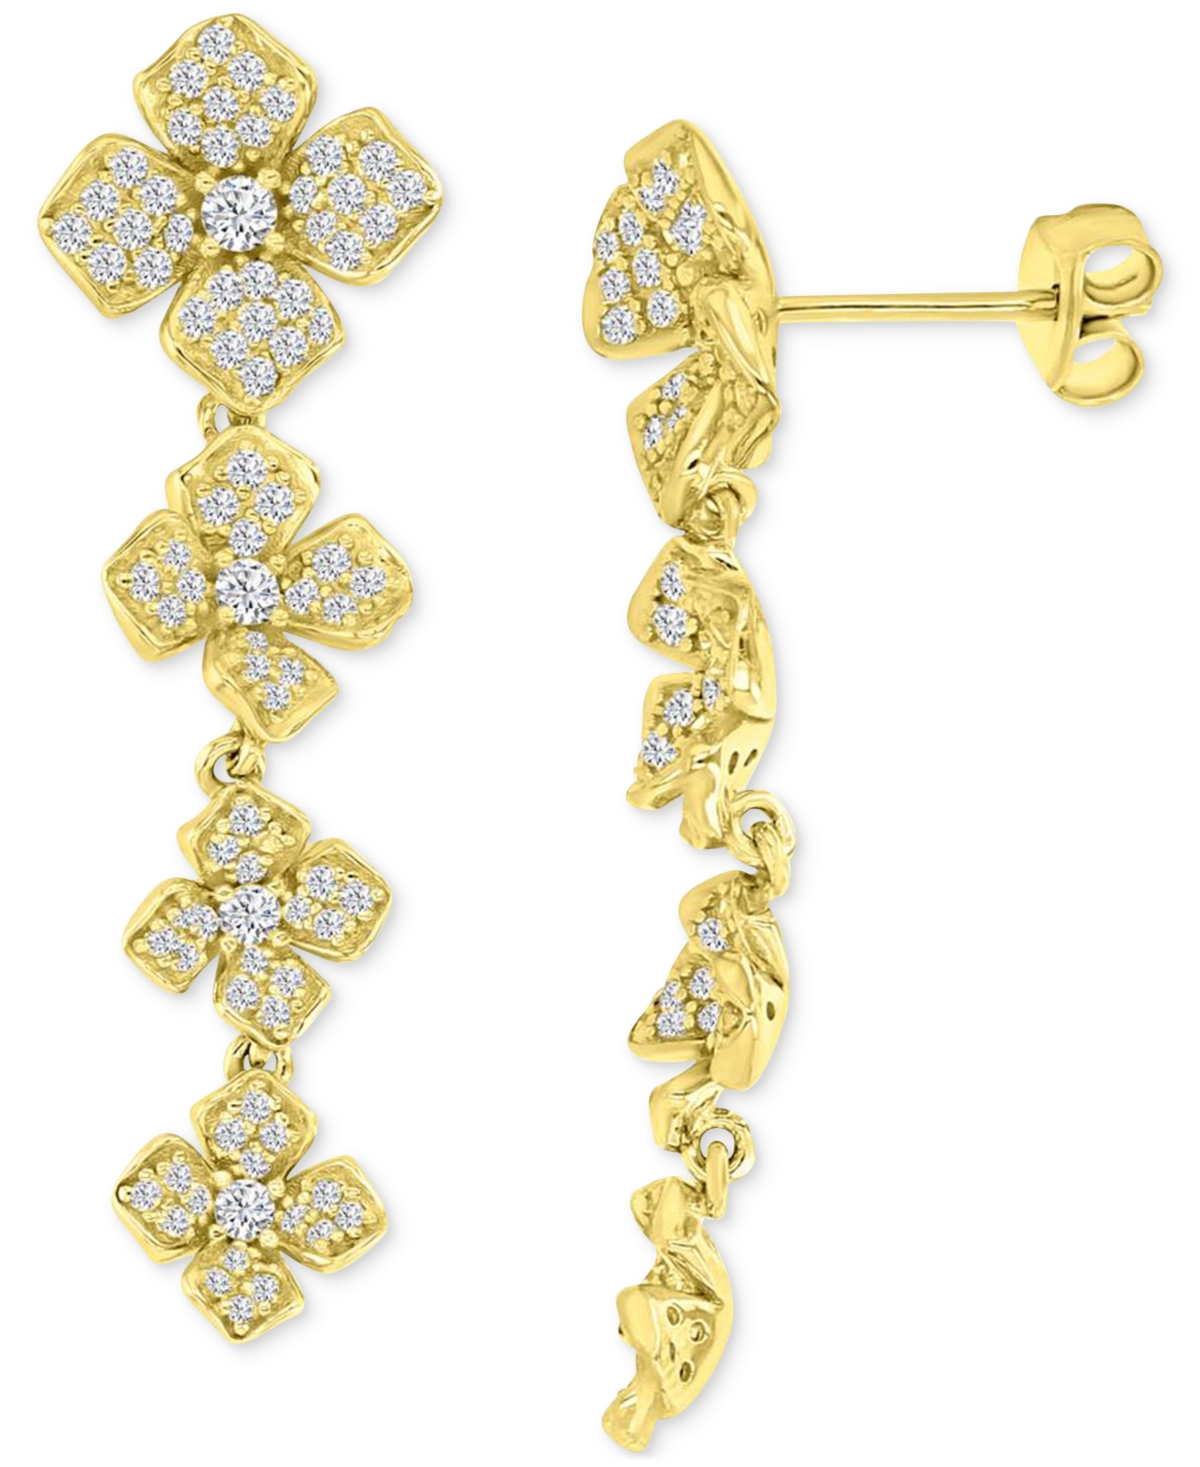 Cubic Zirconia Pave Flower Drop Earrings in 14k Gold-Plated Sterling Silver - Gold